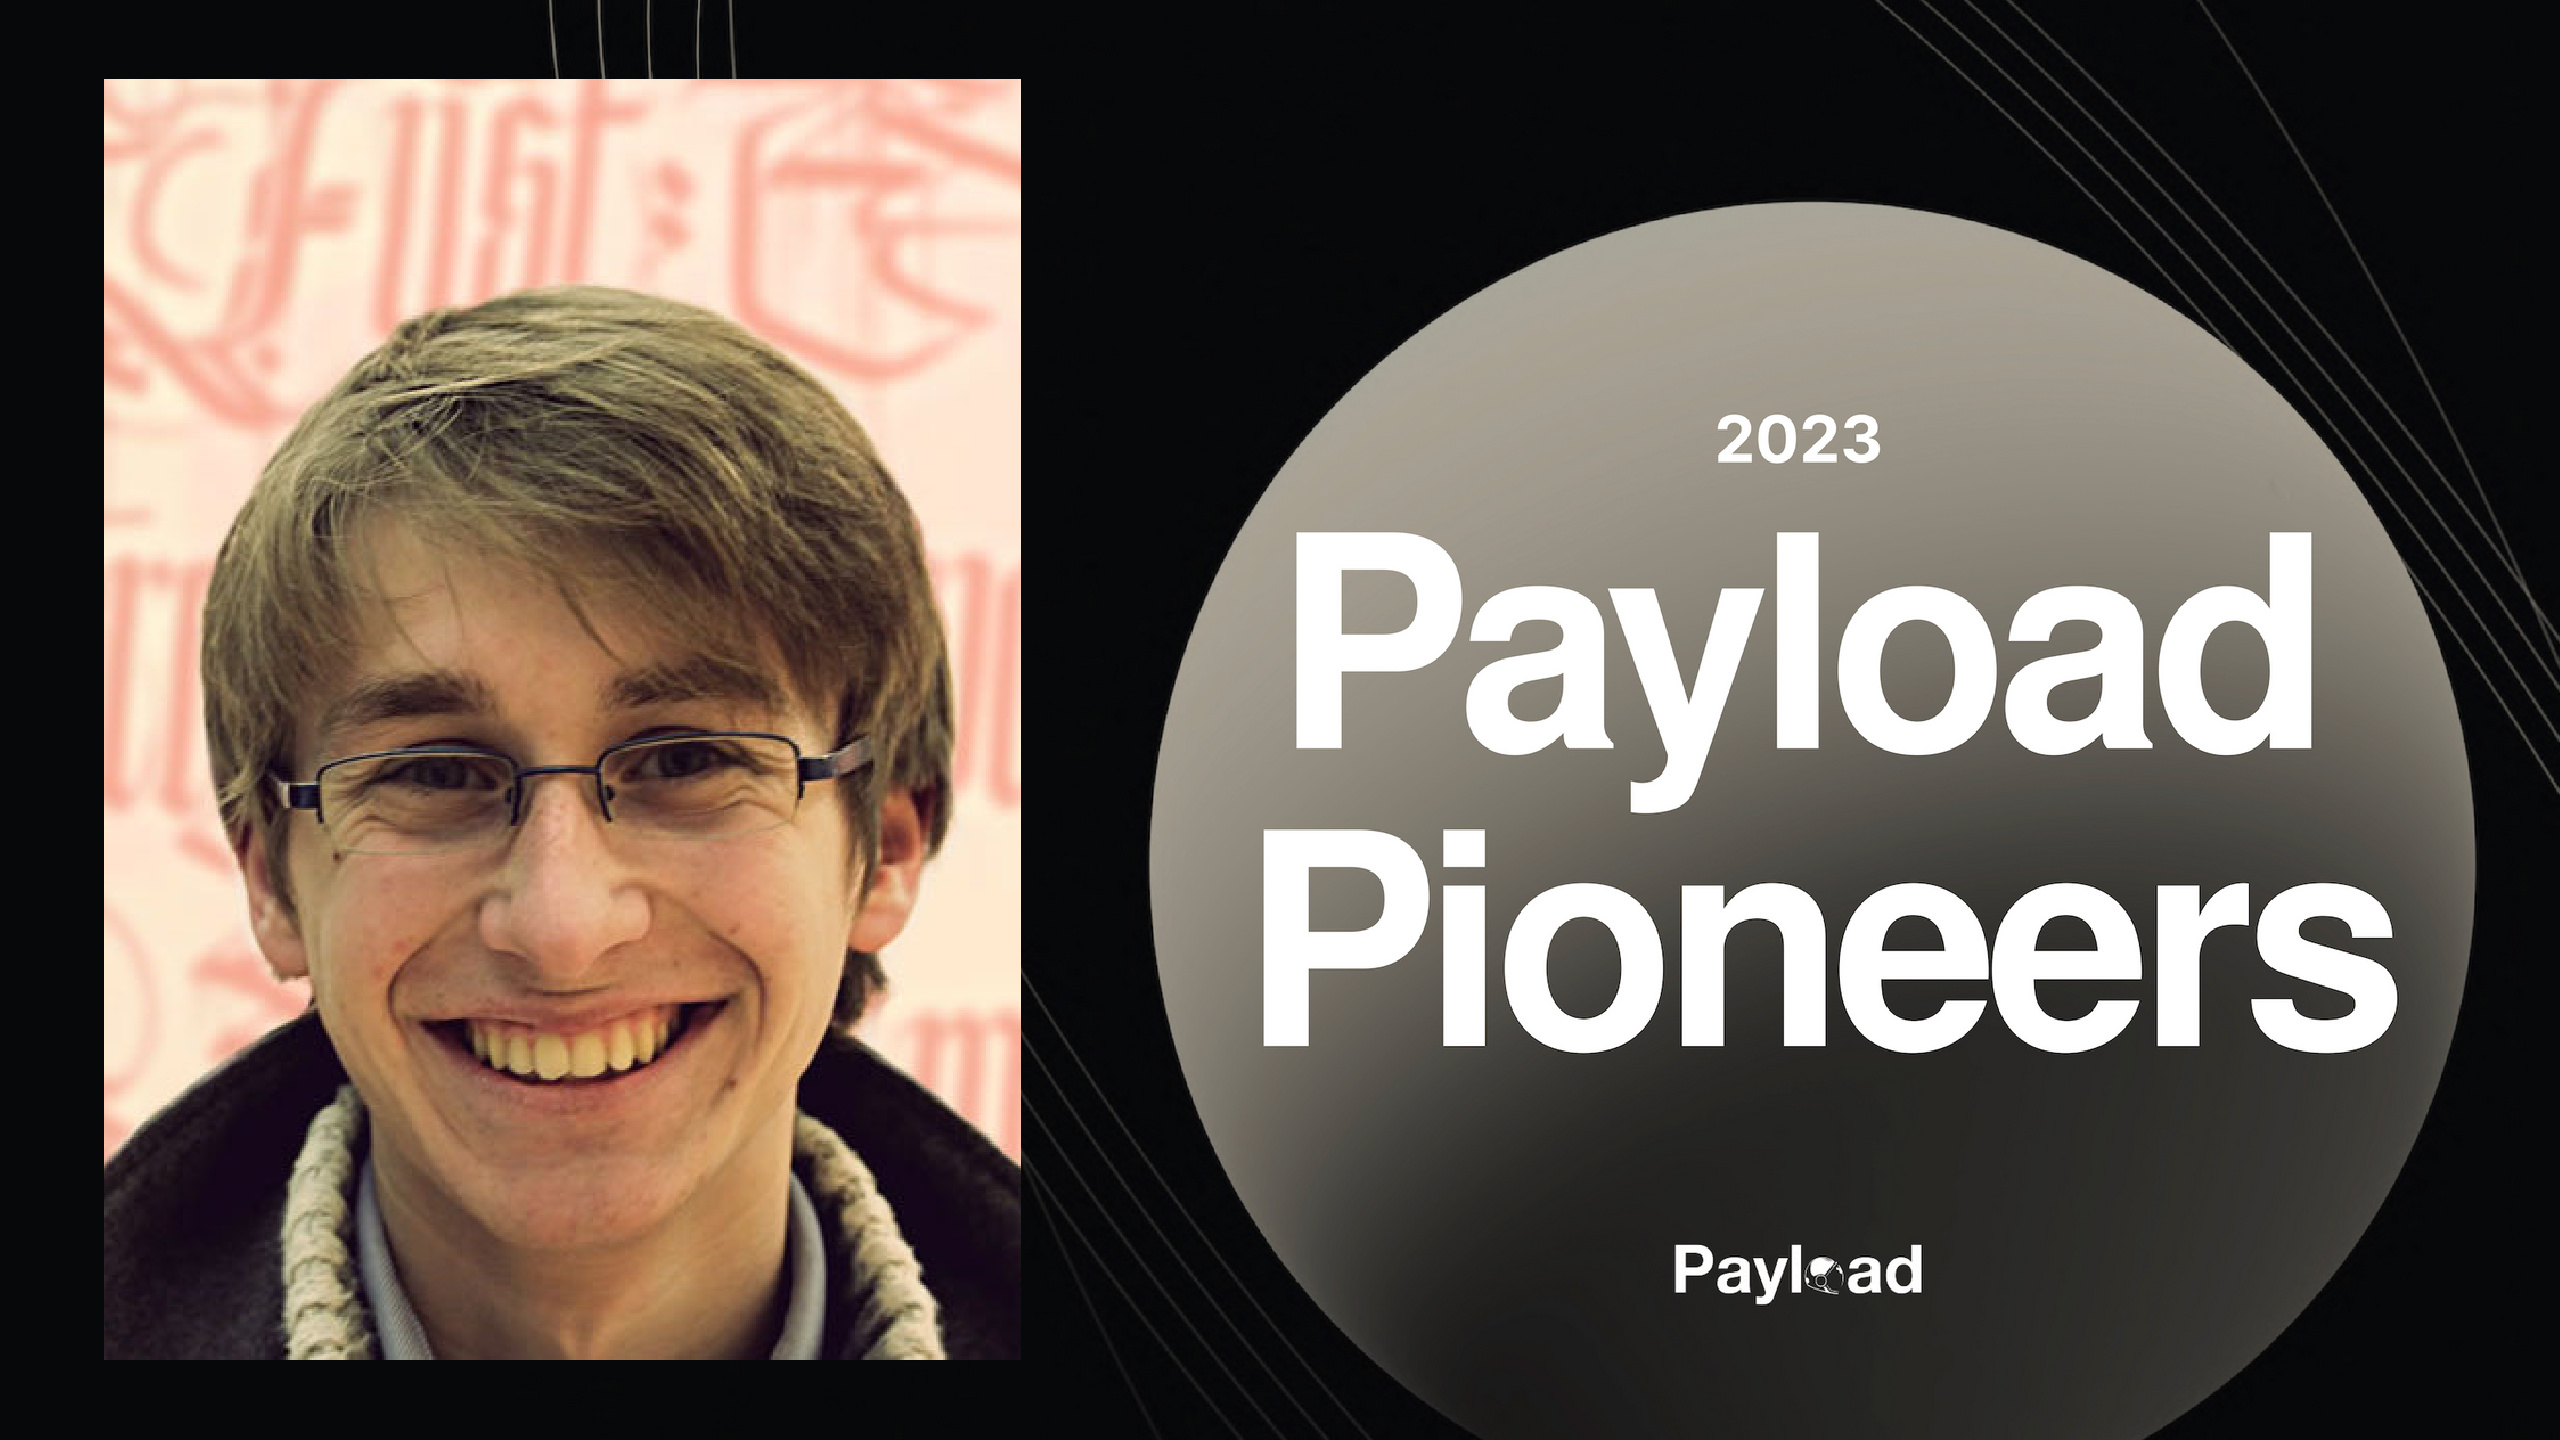 Payload Pioneers 2023: Joseph Dudley